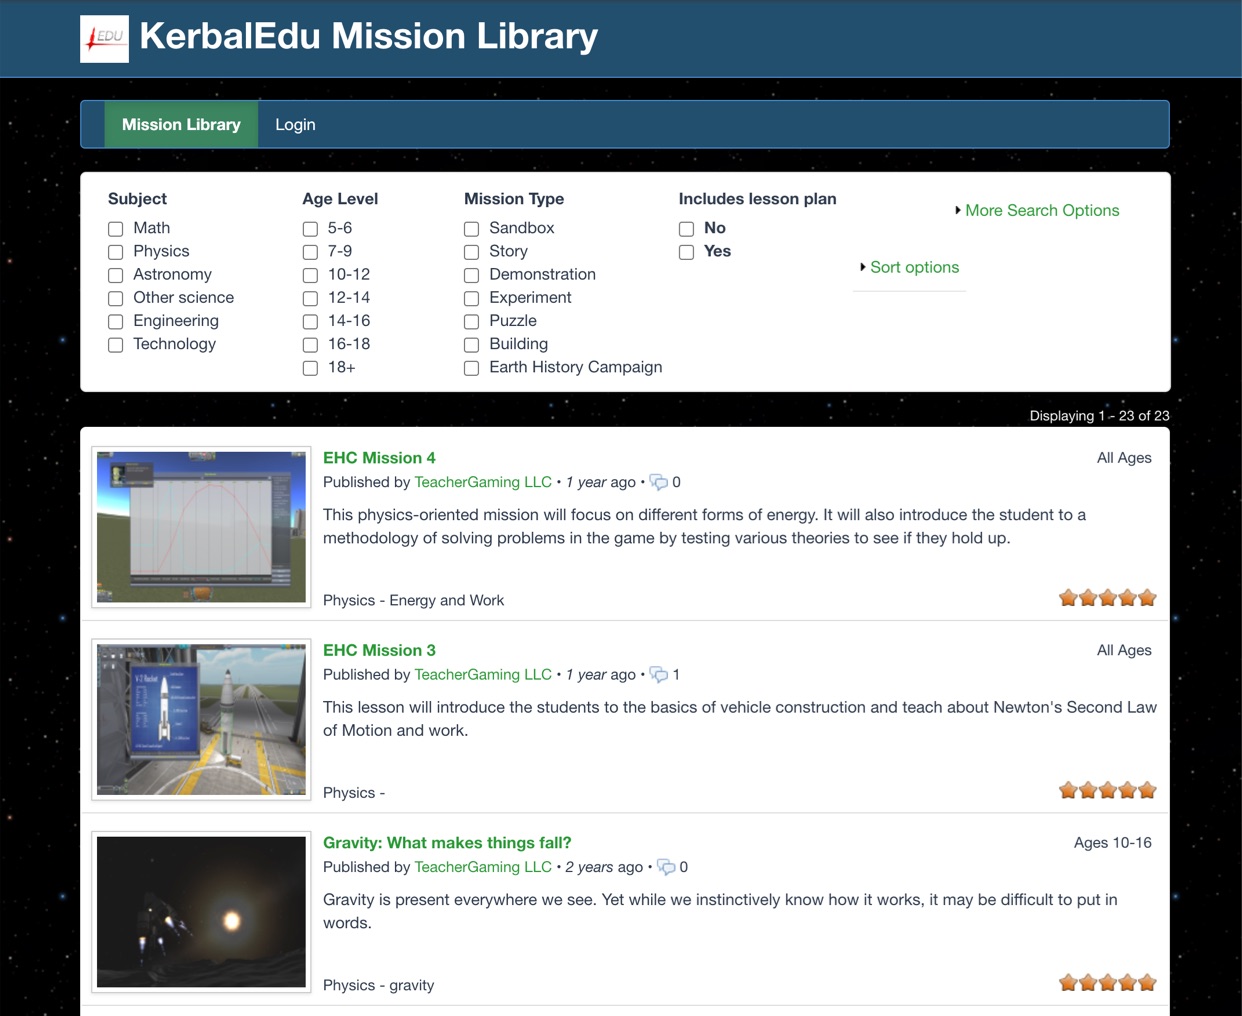 KerbalEdu Mission Library Cover Image